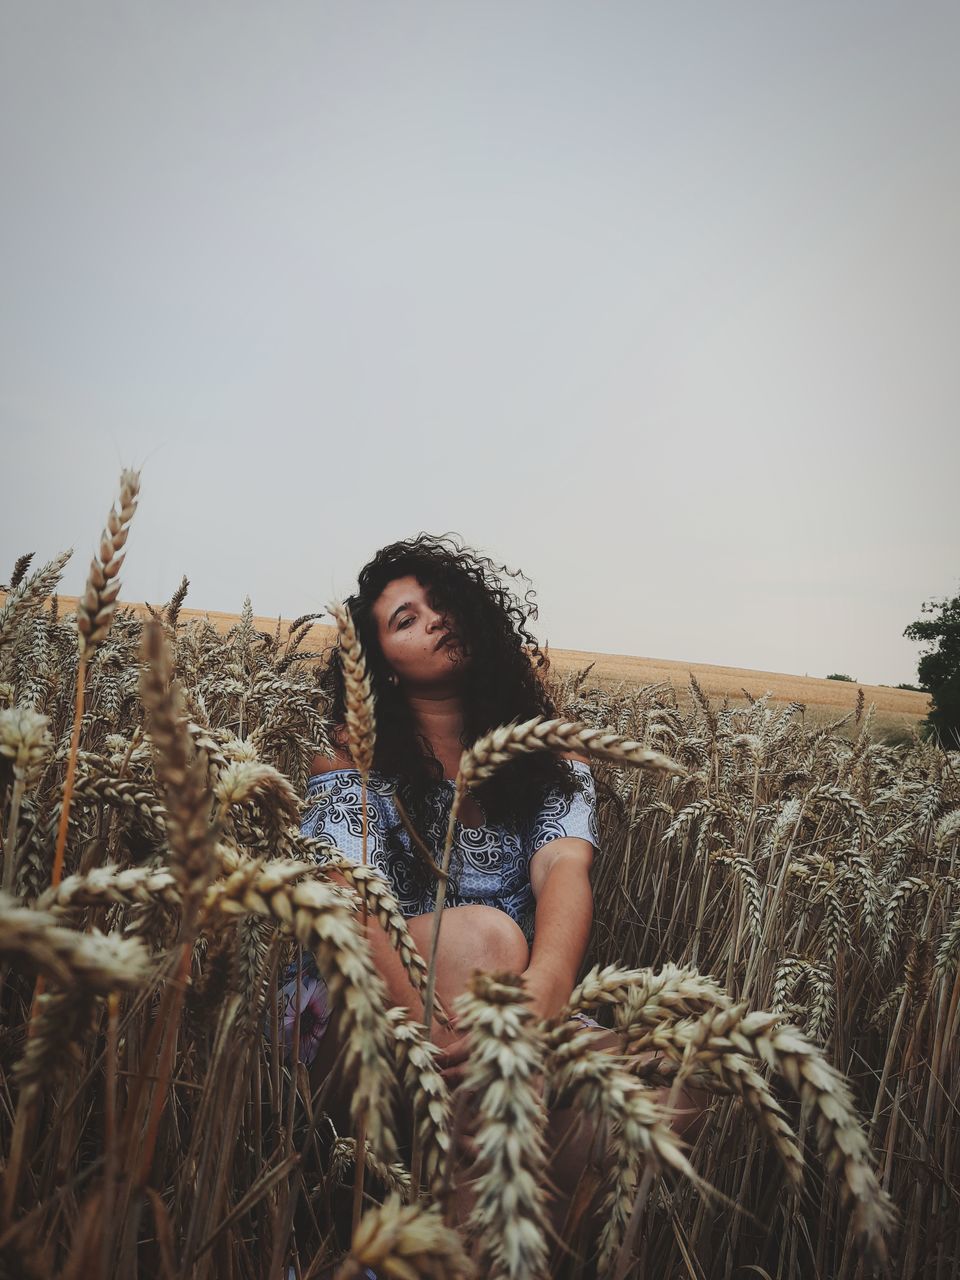 one person, plant, adult, land, agriculture, sky, crop, rural scene, nature, landscape, field, young adult, cereal plant, women, copy space, hairstyle, long hair, portrait, farm, environment, looking, brown hair, day, wheat, growth, outdoors, three quarter length, tranquility, casual clothing, clothing, straw, leisure activity, smiling, lifestyles, standing, harvest, front view, harvesting, waist up, looking at camera, clear sky, summer, beauty in nature, fashion, contemplation, relaxation, emotion, hay, corn